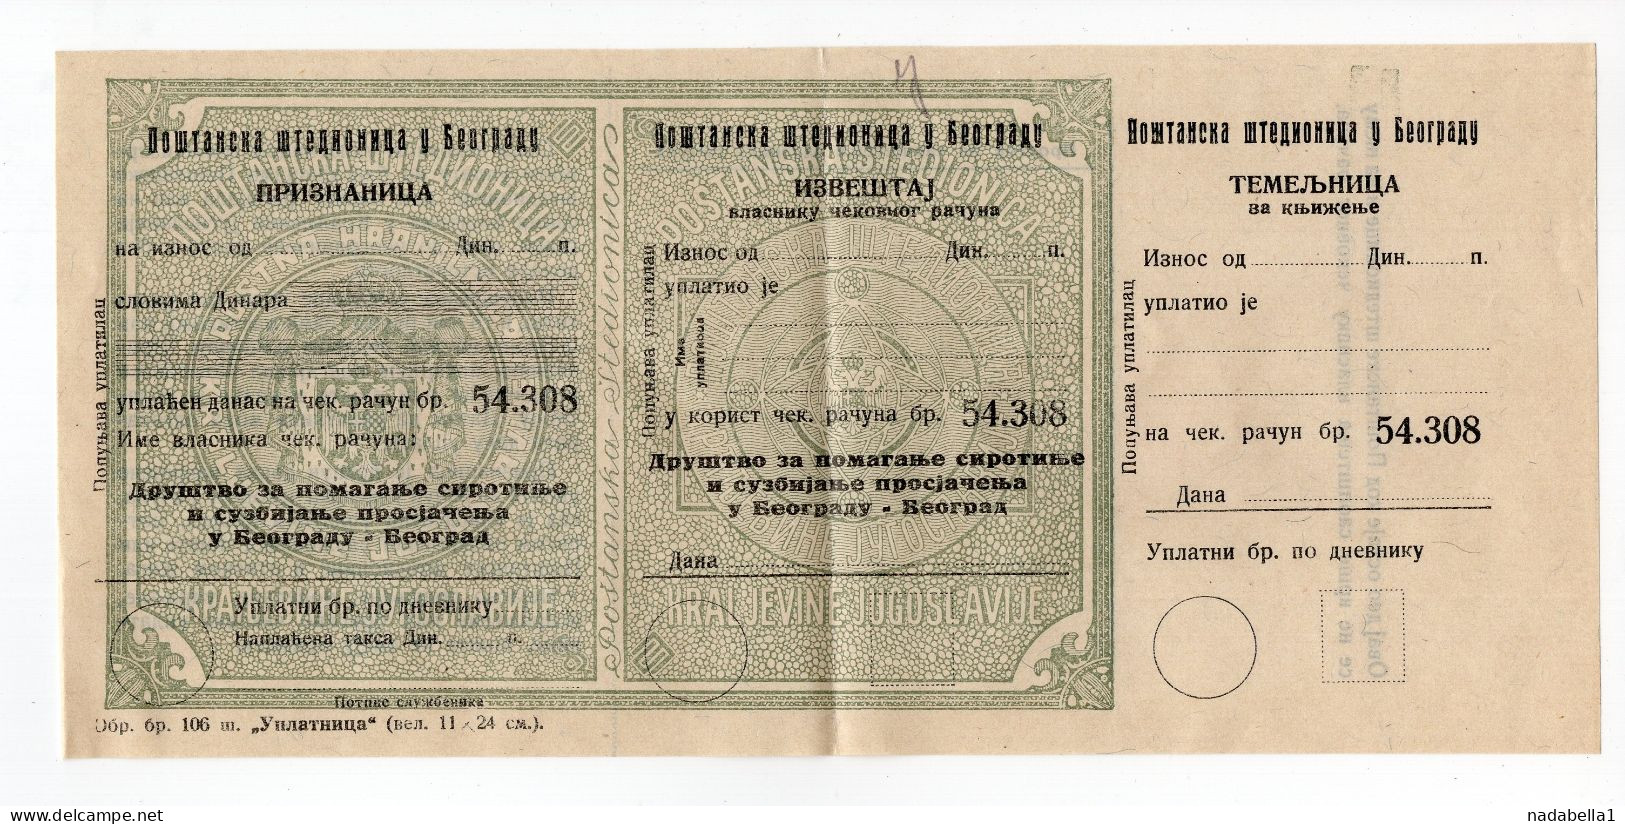 1930s KINGDOM OF YUGOSLAVIA,BELGRADE,CHARITY HELPING AND STOPPING BEGGING IN BELGRADE,POSTAL SAVINS BANK CHEQUE - Cheques & Traveler's Cheques